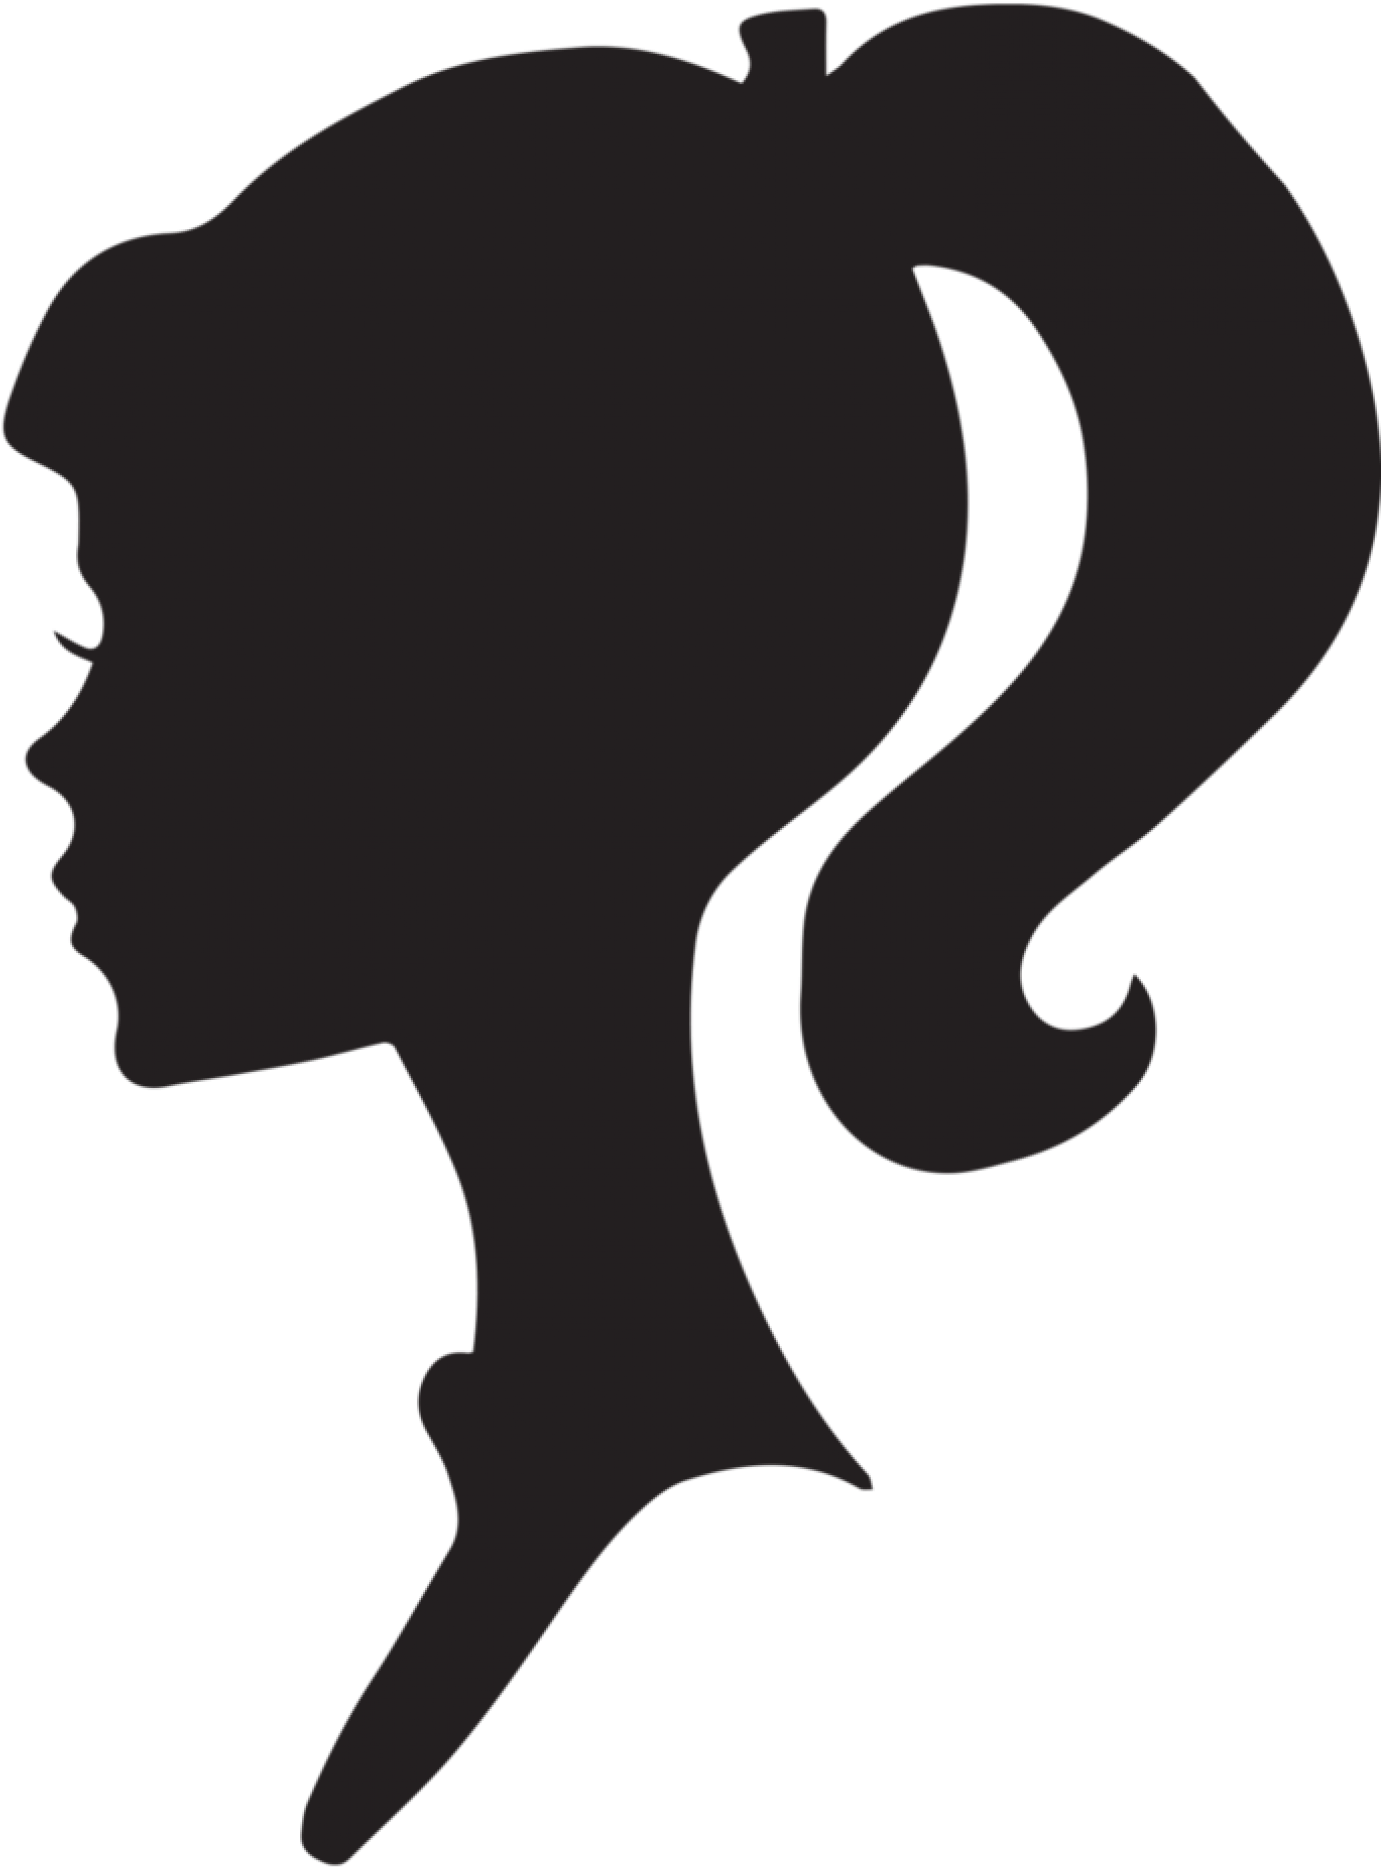 Cropped Female Silhouette Head Face Icon 33 Â€“ Titas - My Weekly Planner [book] (1440x2147)